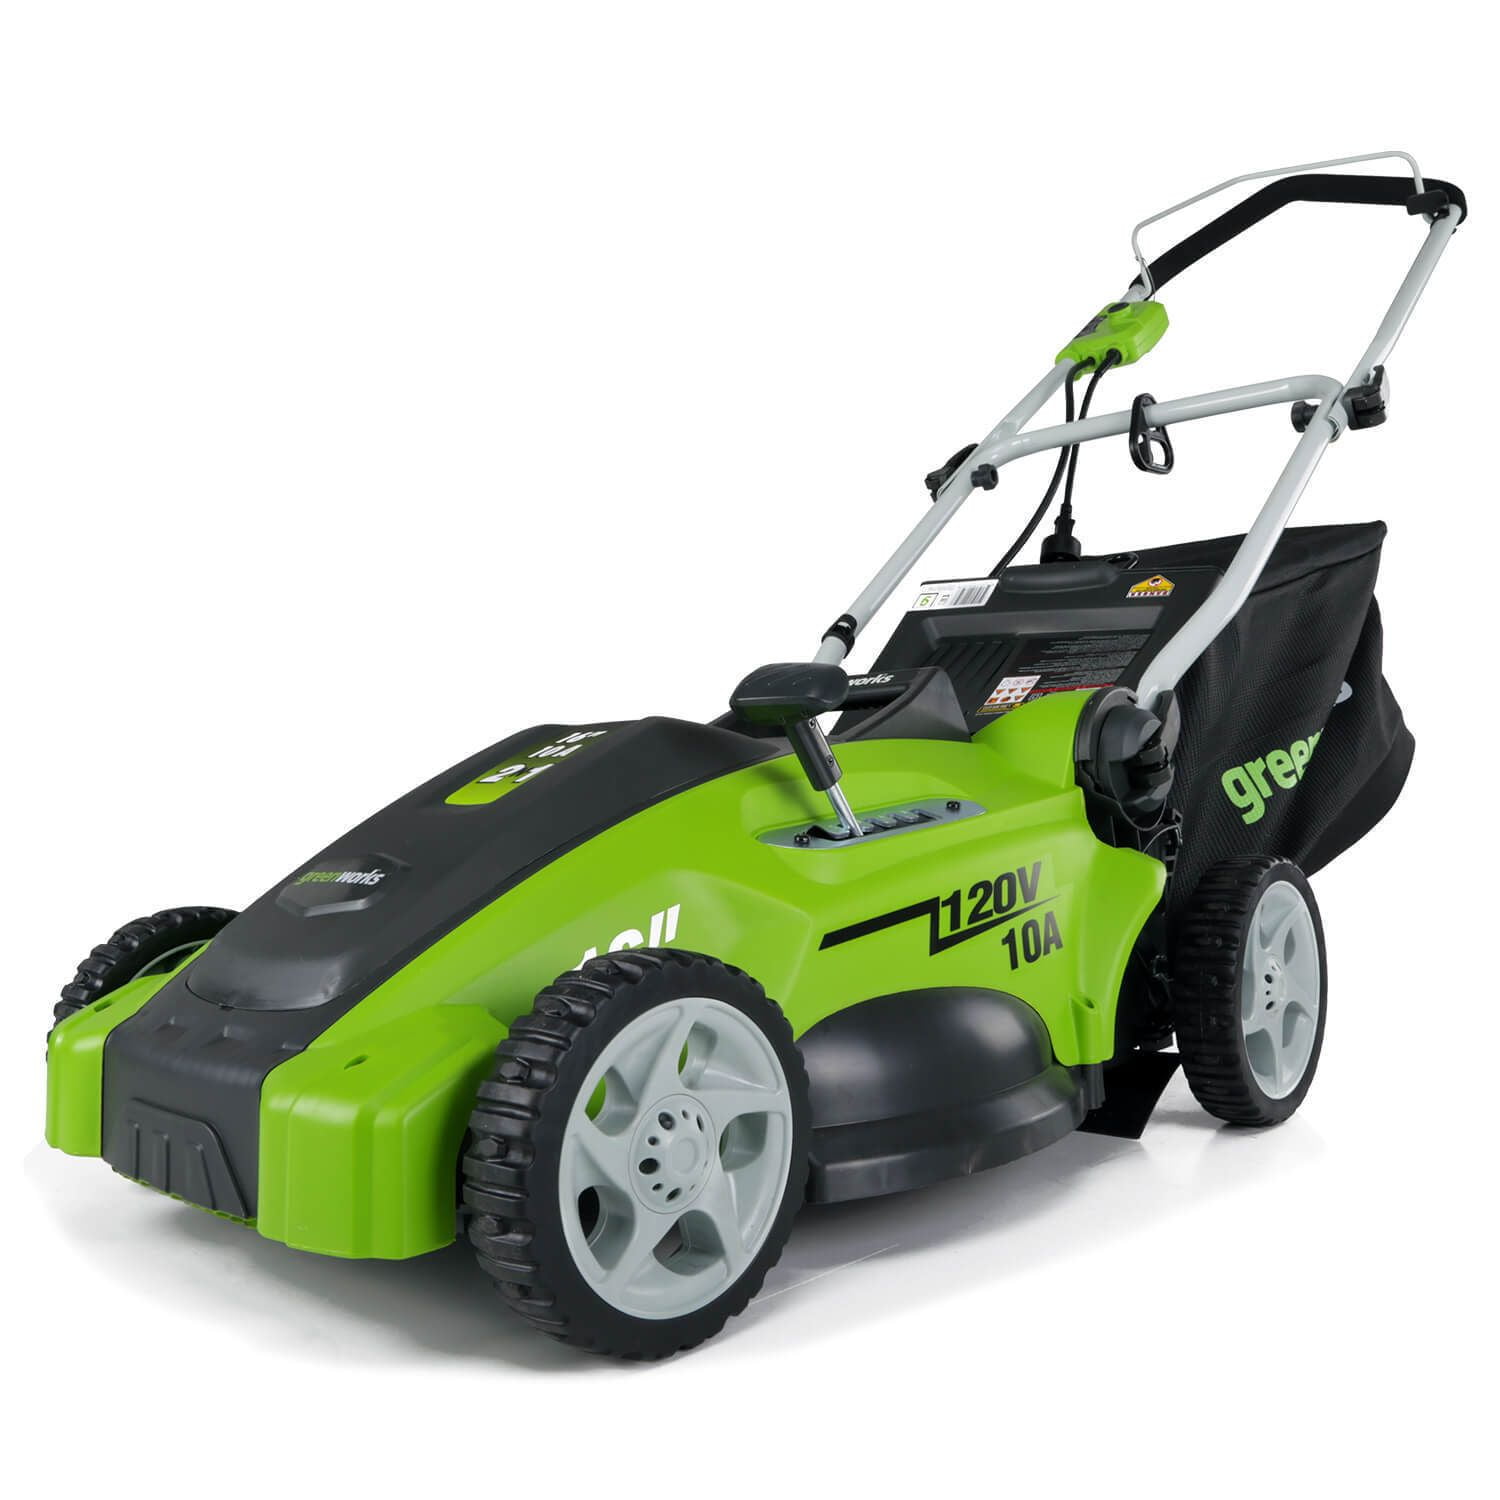 Earthwise 2120-16 20-Volt 16-Inch Electric Cordless Reel Lawn Mower, 2.0Ah  Battery & Fast Charger Included 